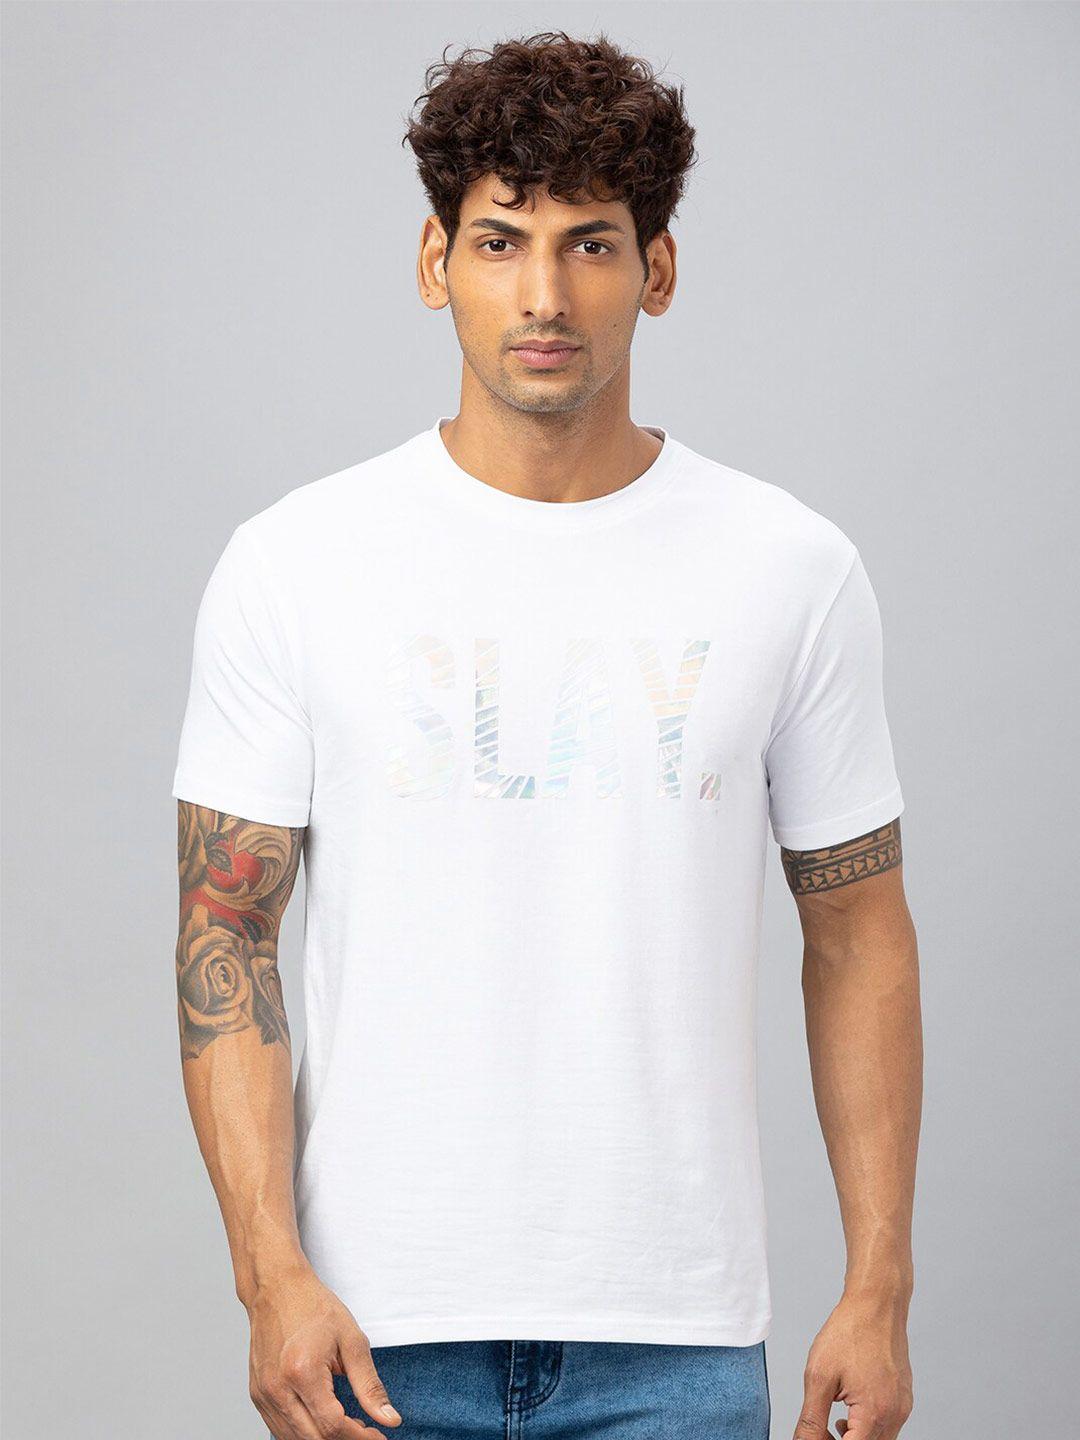 globus typography printed pure cotton t-shirt